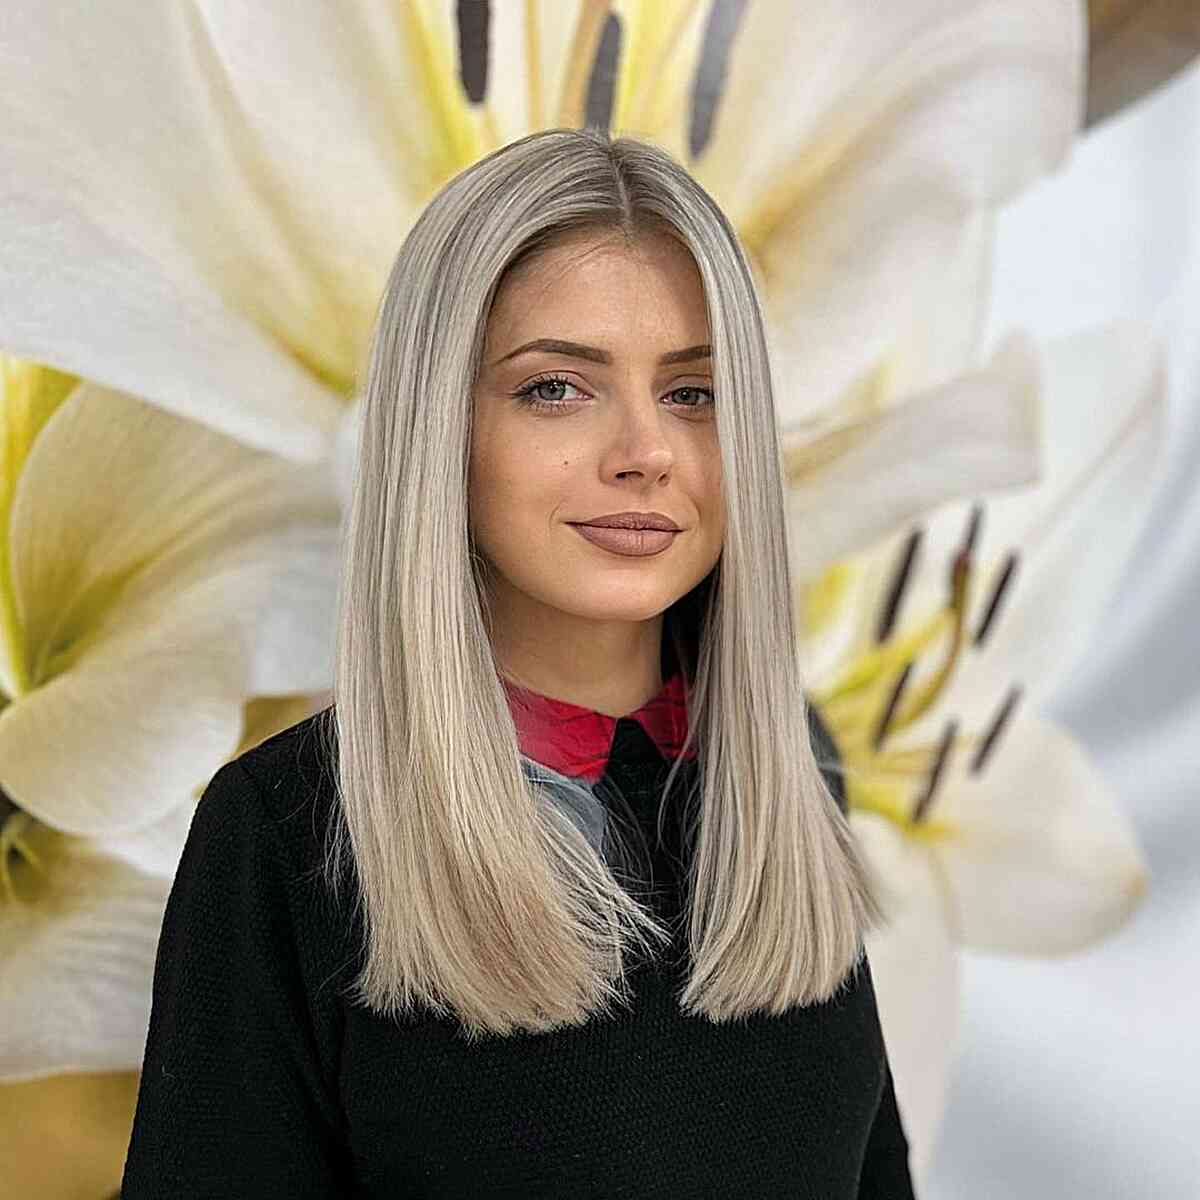 Stunningly Sleek Straight Haircut with a center part for women in their 30s